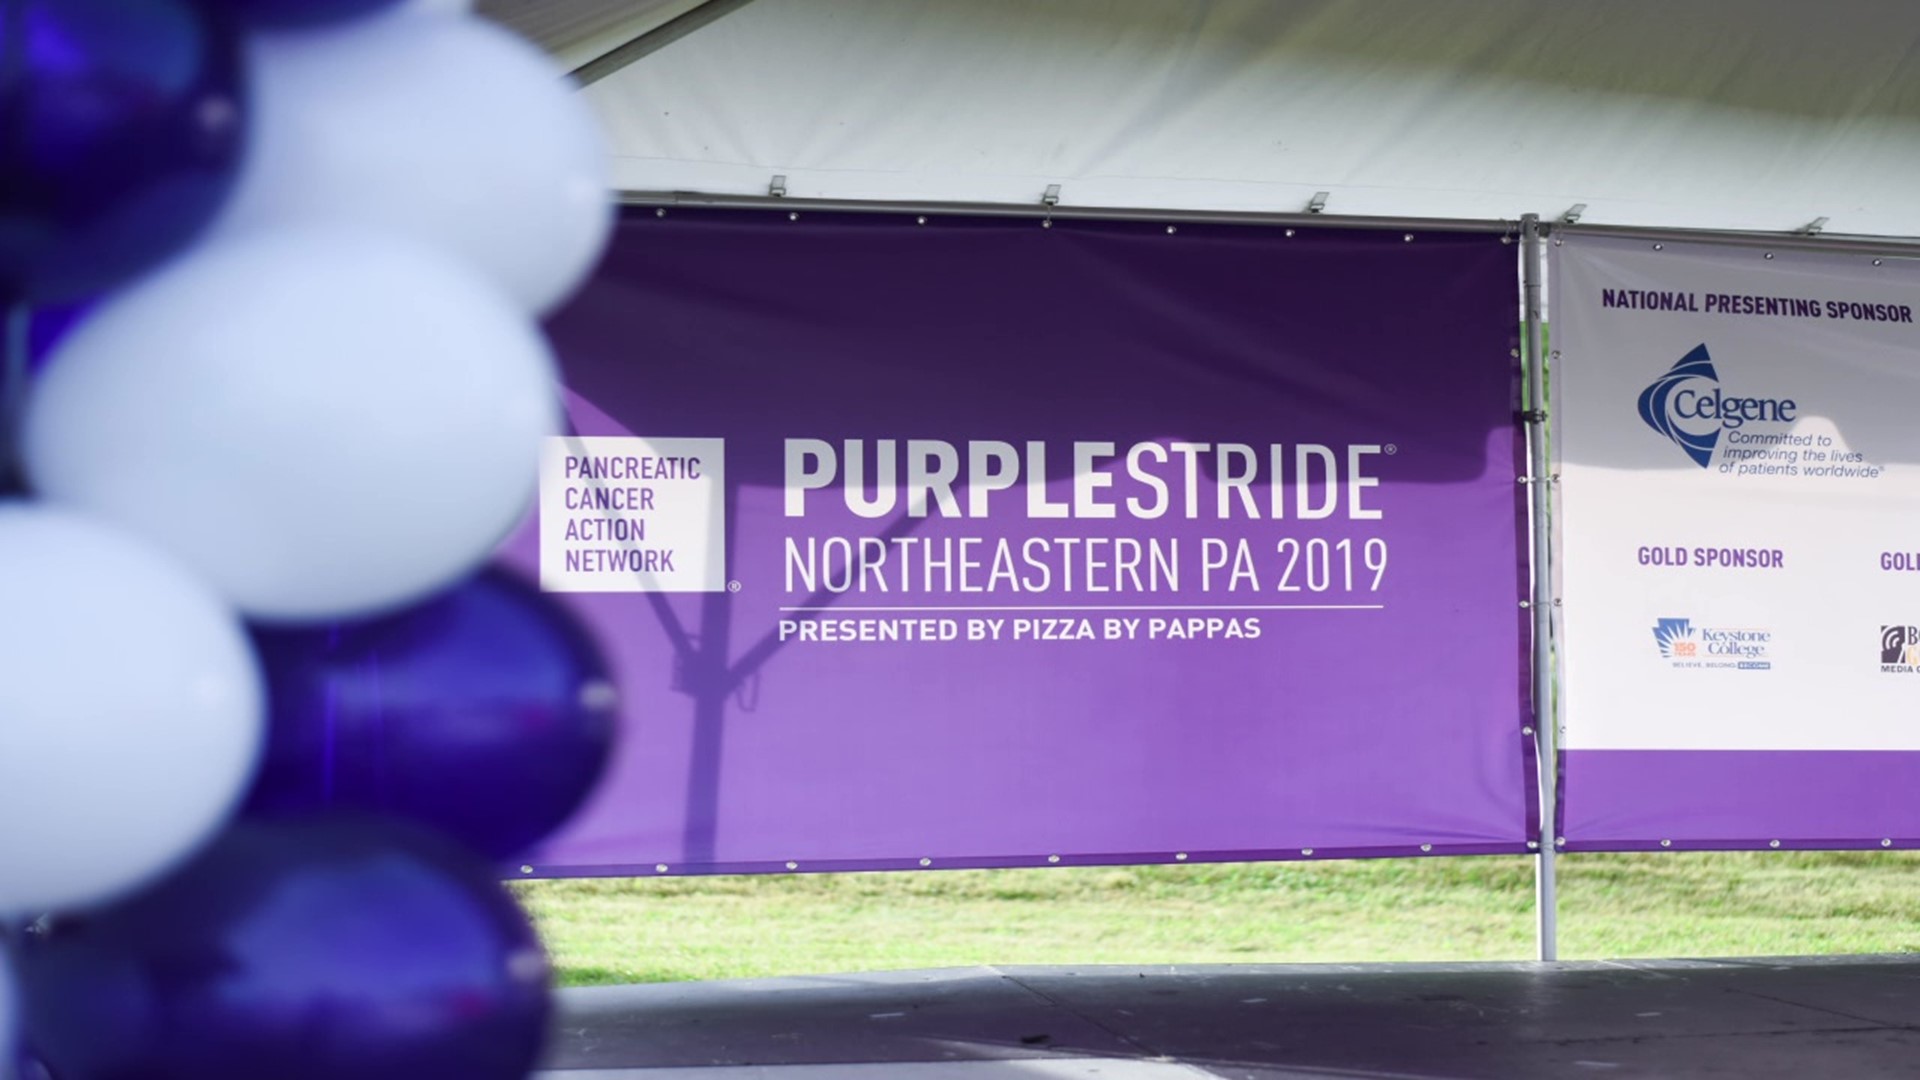 Pancreatic cancer doesn't stop and neither does Purple Stride, a fundraiser for the Pancreatic Cancer Action Network. And it's not too late for you to get involved.